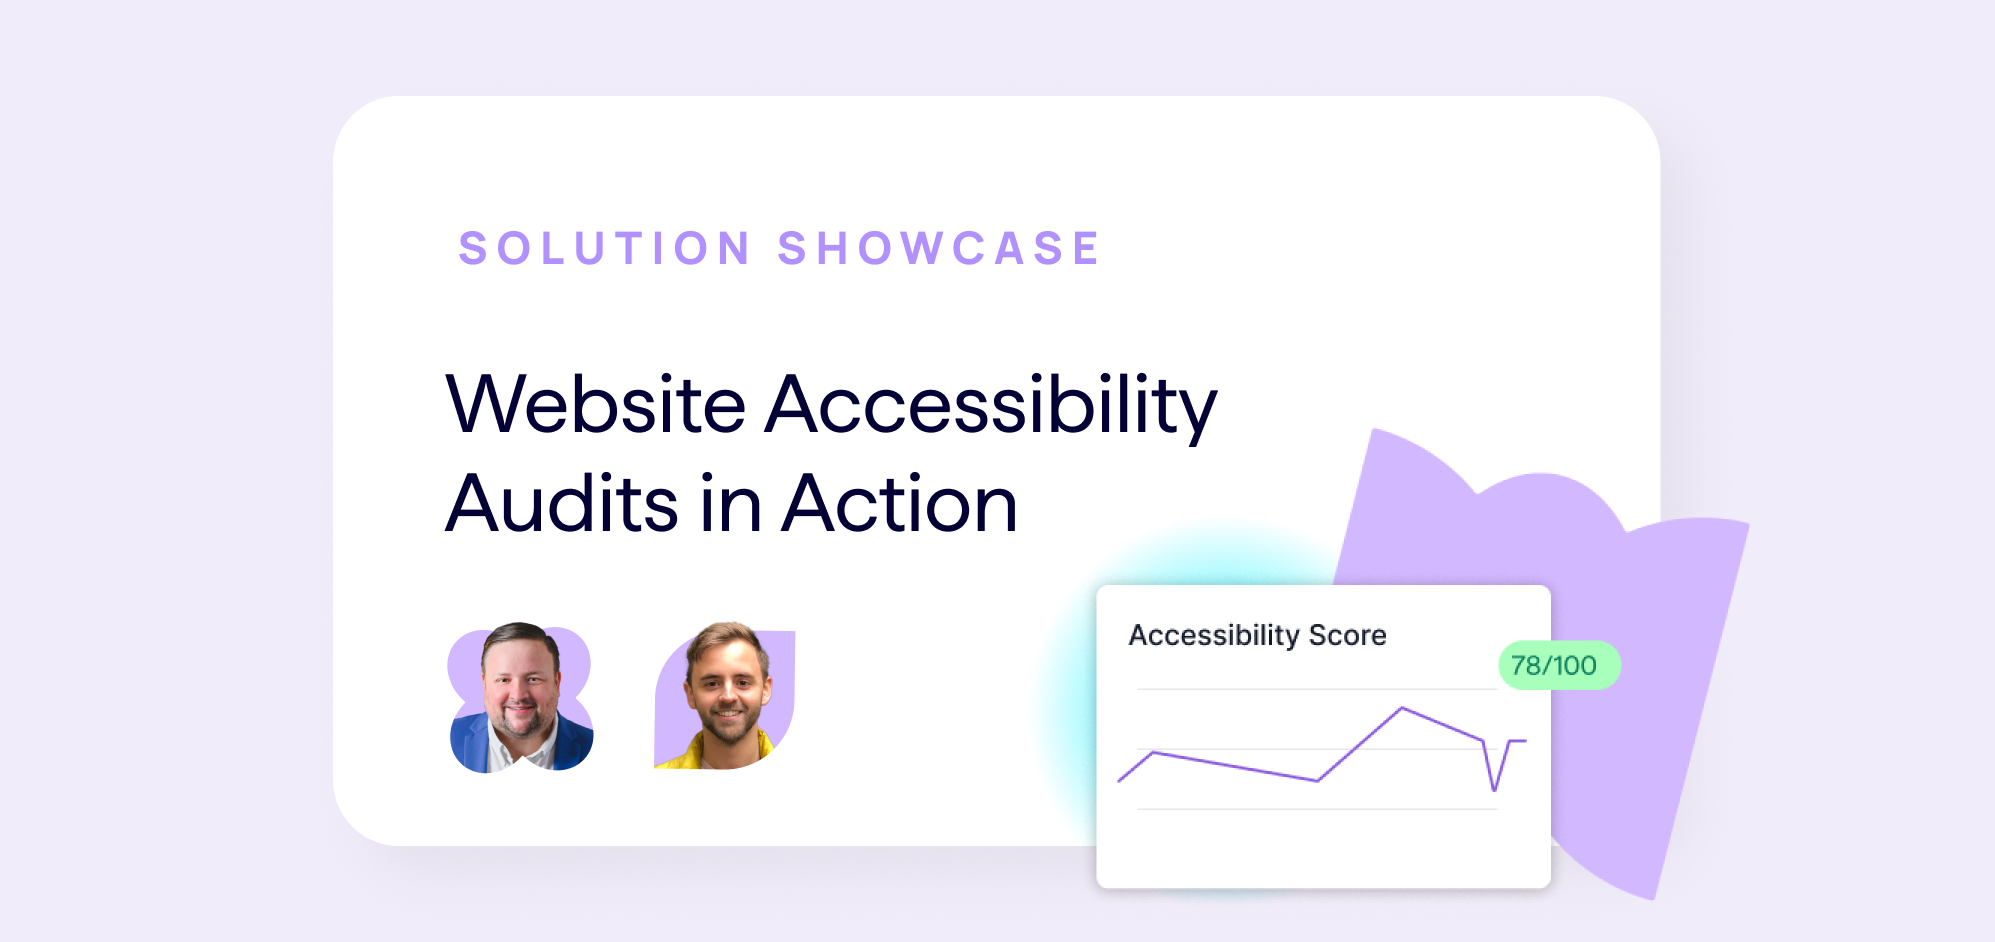 Cover Image - Web Accessibility Webinar Banner. Text reads: Website Accessibility Audits in Action. (Lumar Solutions Showcase). Register Now. Shows Expert Speaker Photos for Lumar product manager Matt Ford and Lumar head of product marketing, Andrew Levey.